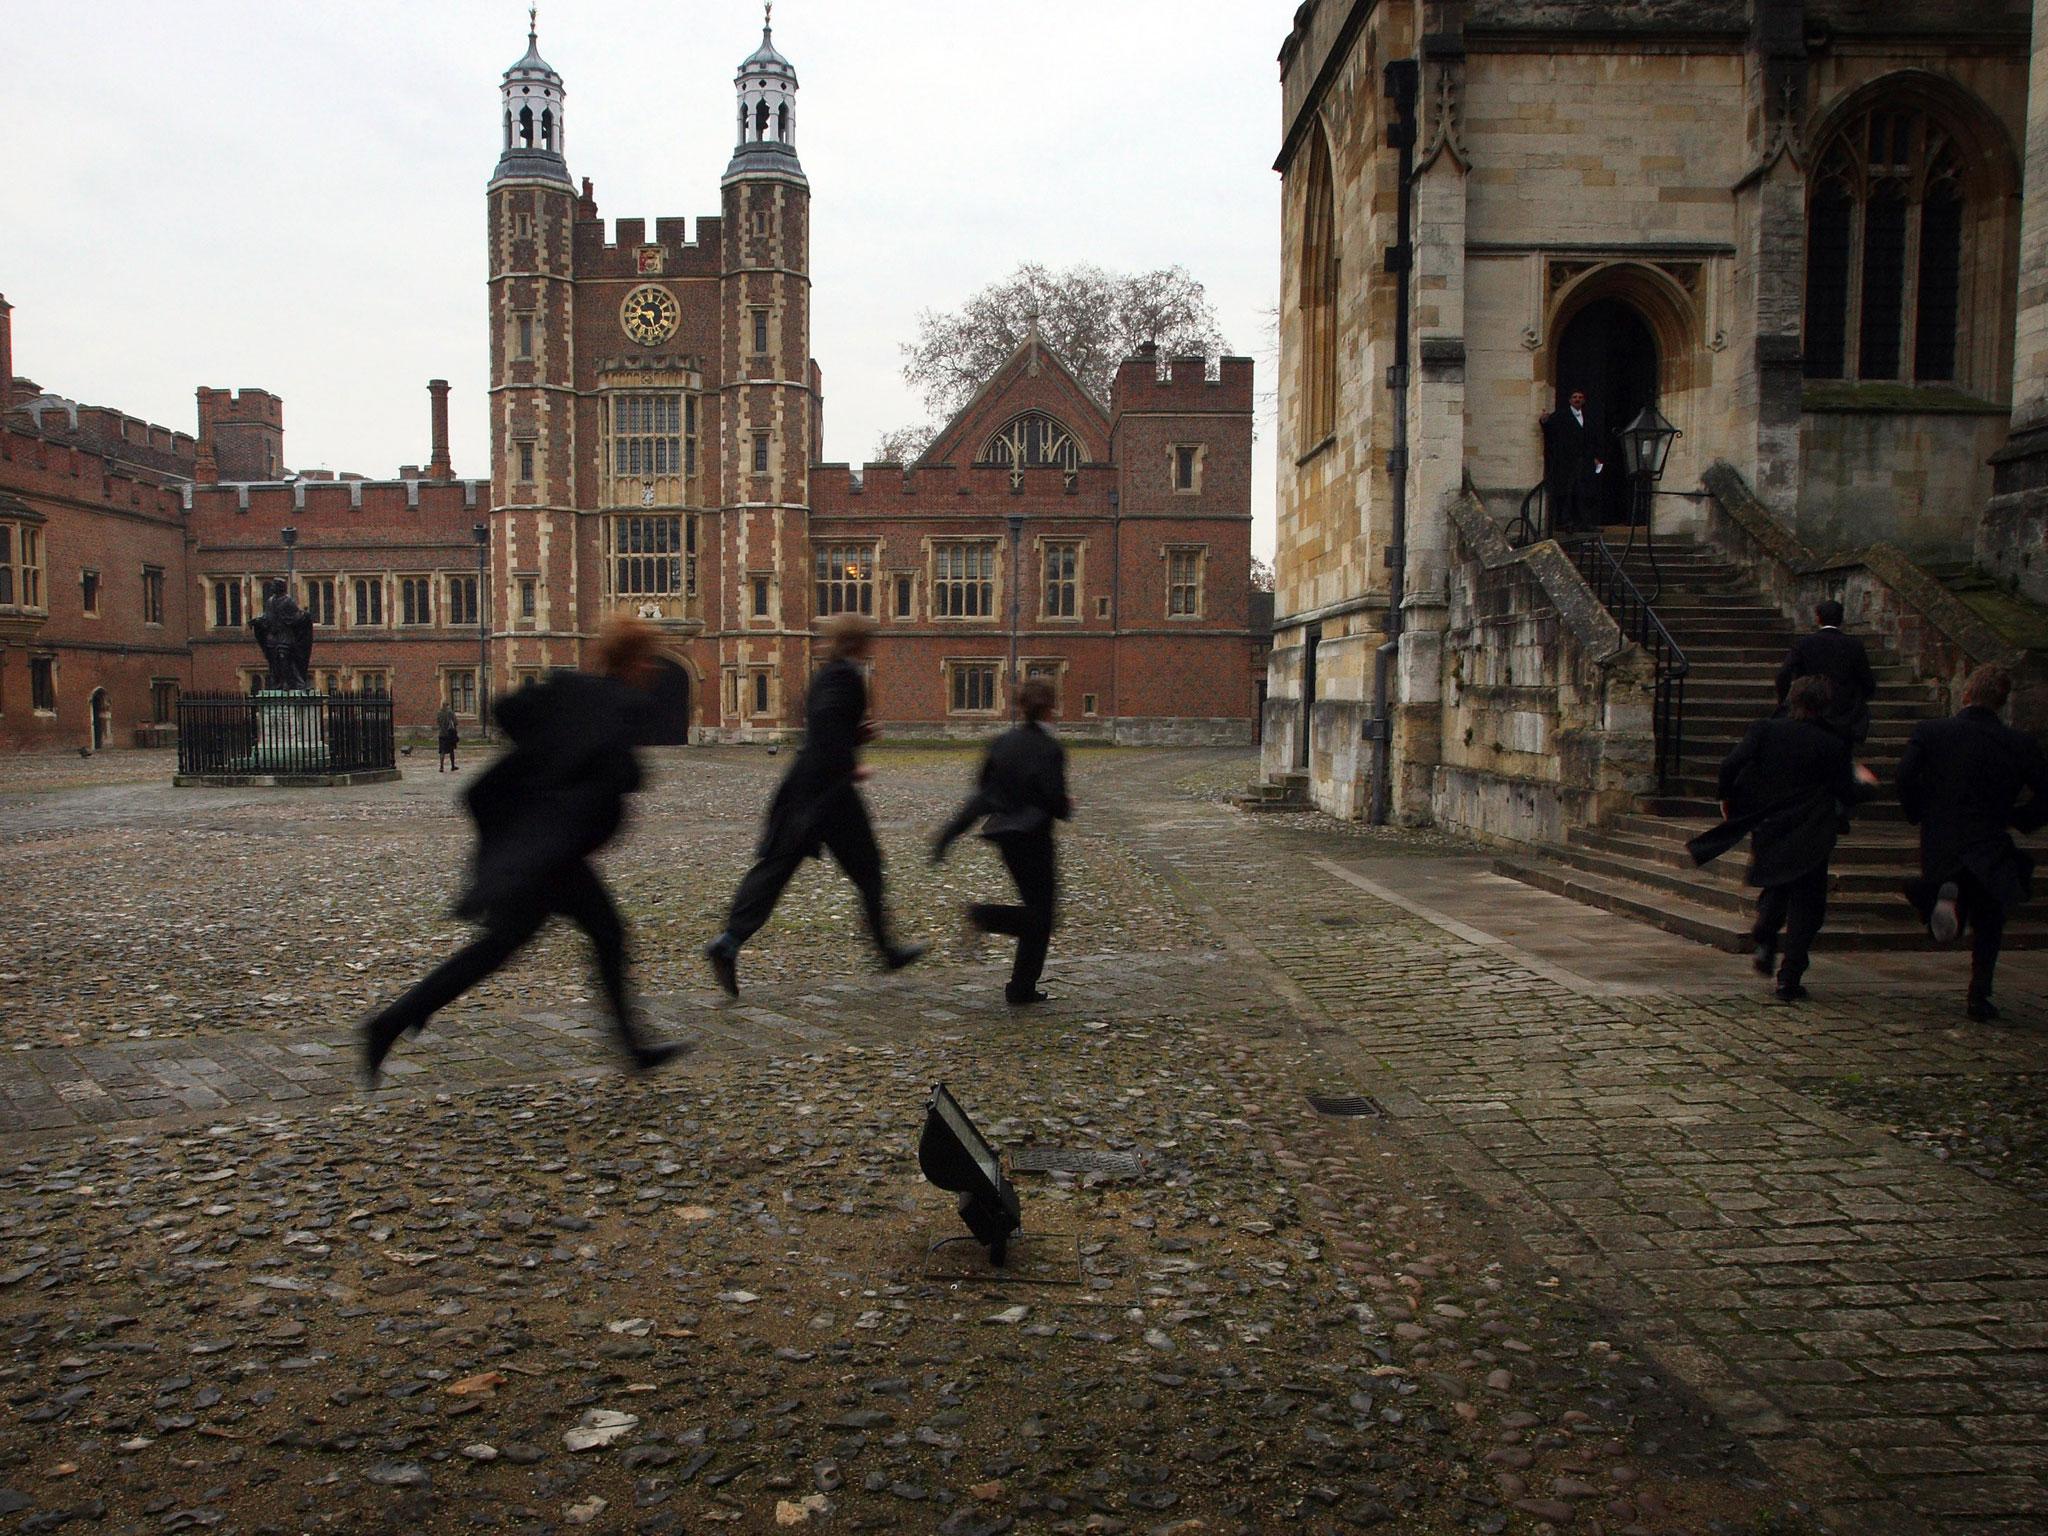 Up to £1.4m a year is spent on child benefit for pupils at Eton College